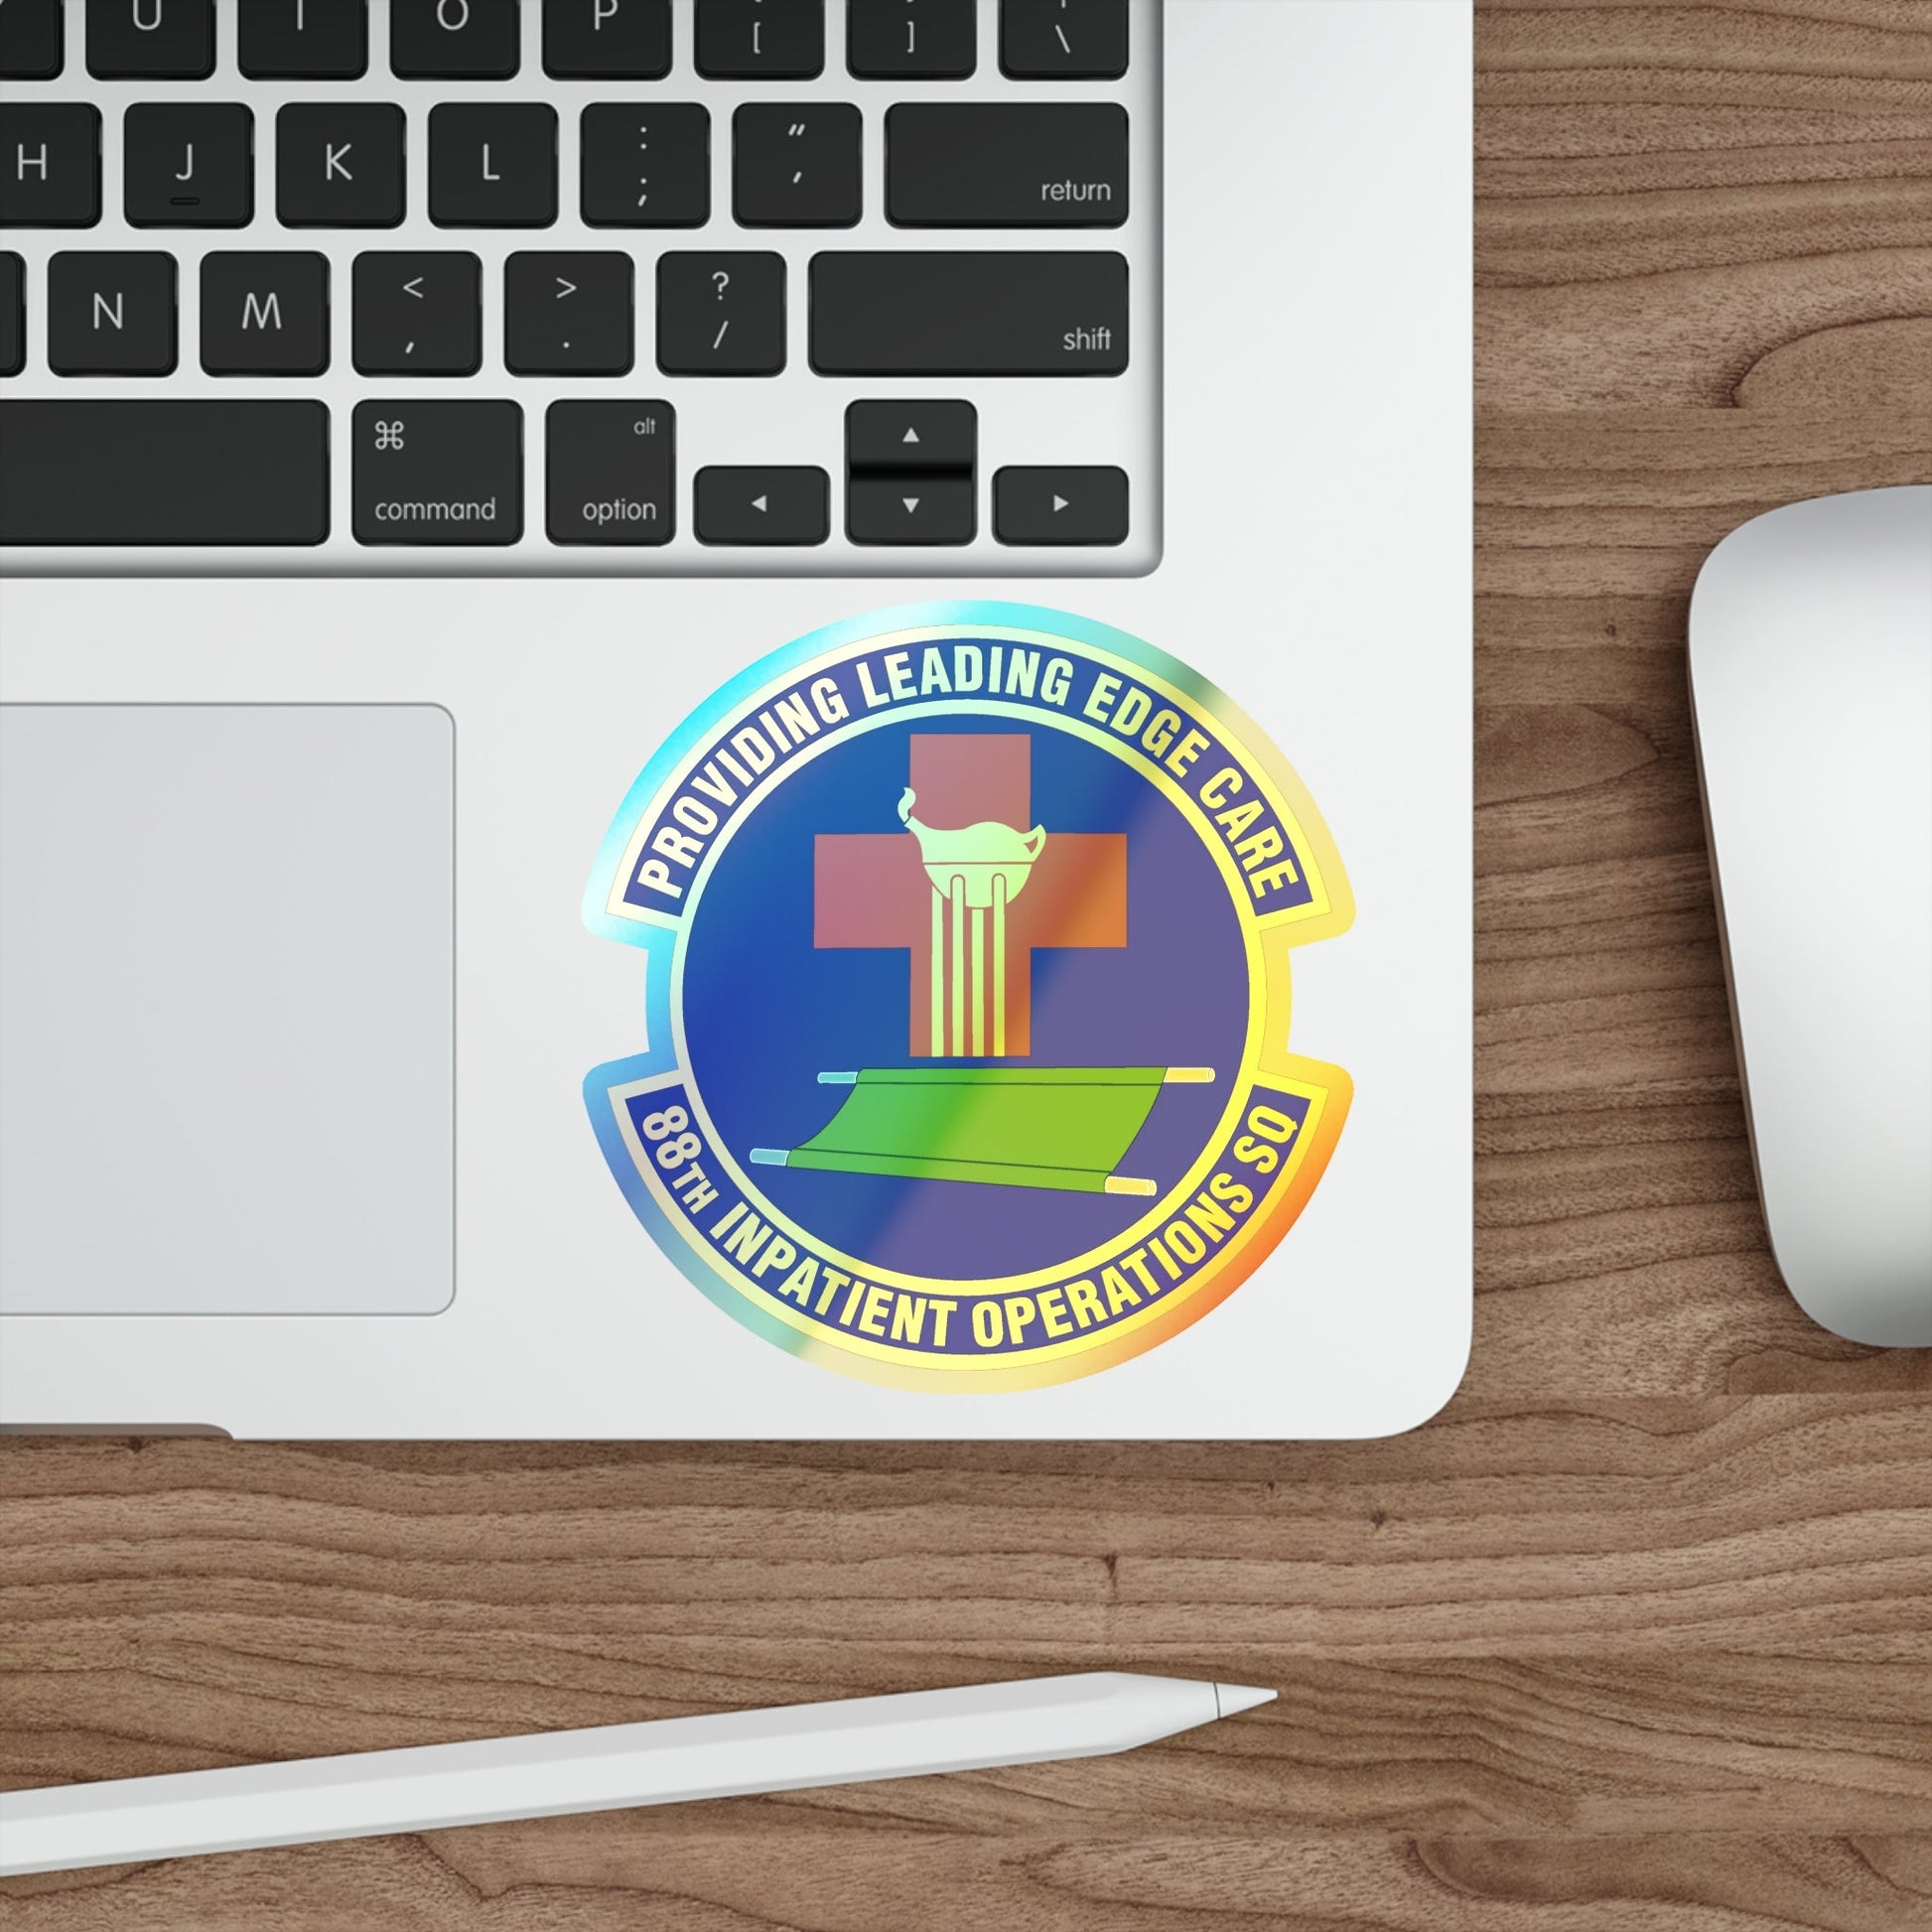 88 Inpatient Operations Squadron AFMC (U.S. Air Force) Holographic STICKER Die-Cut Vinyl Decal-The Sticker Space